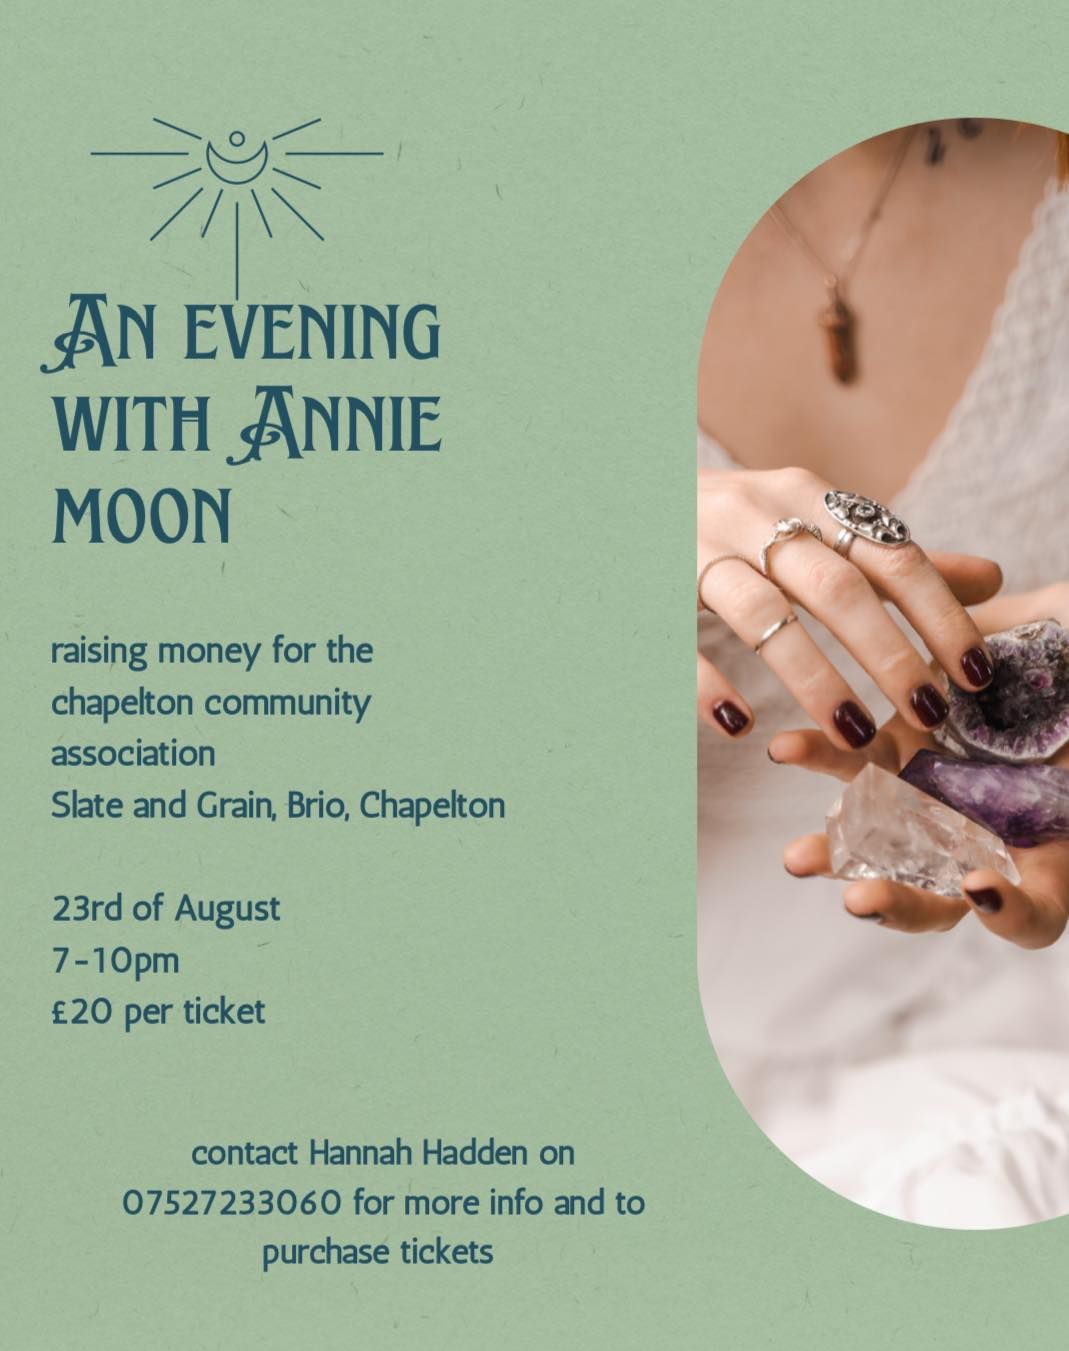 An Evening with Annie Moon